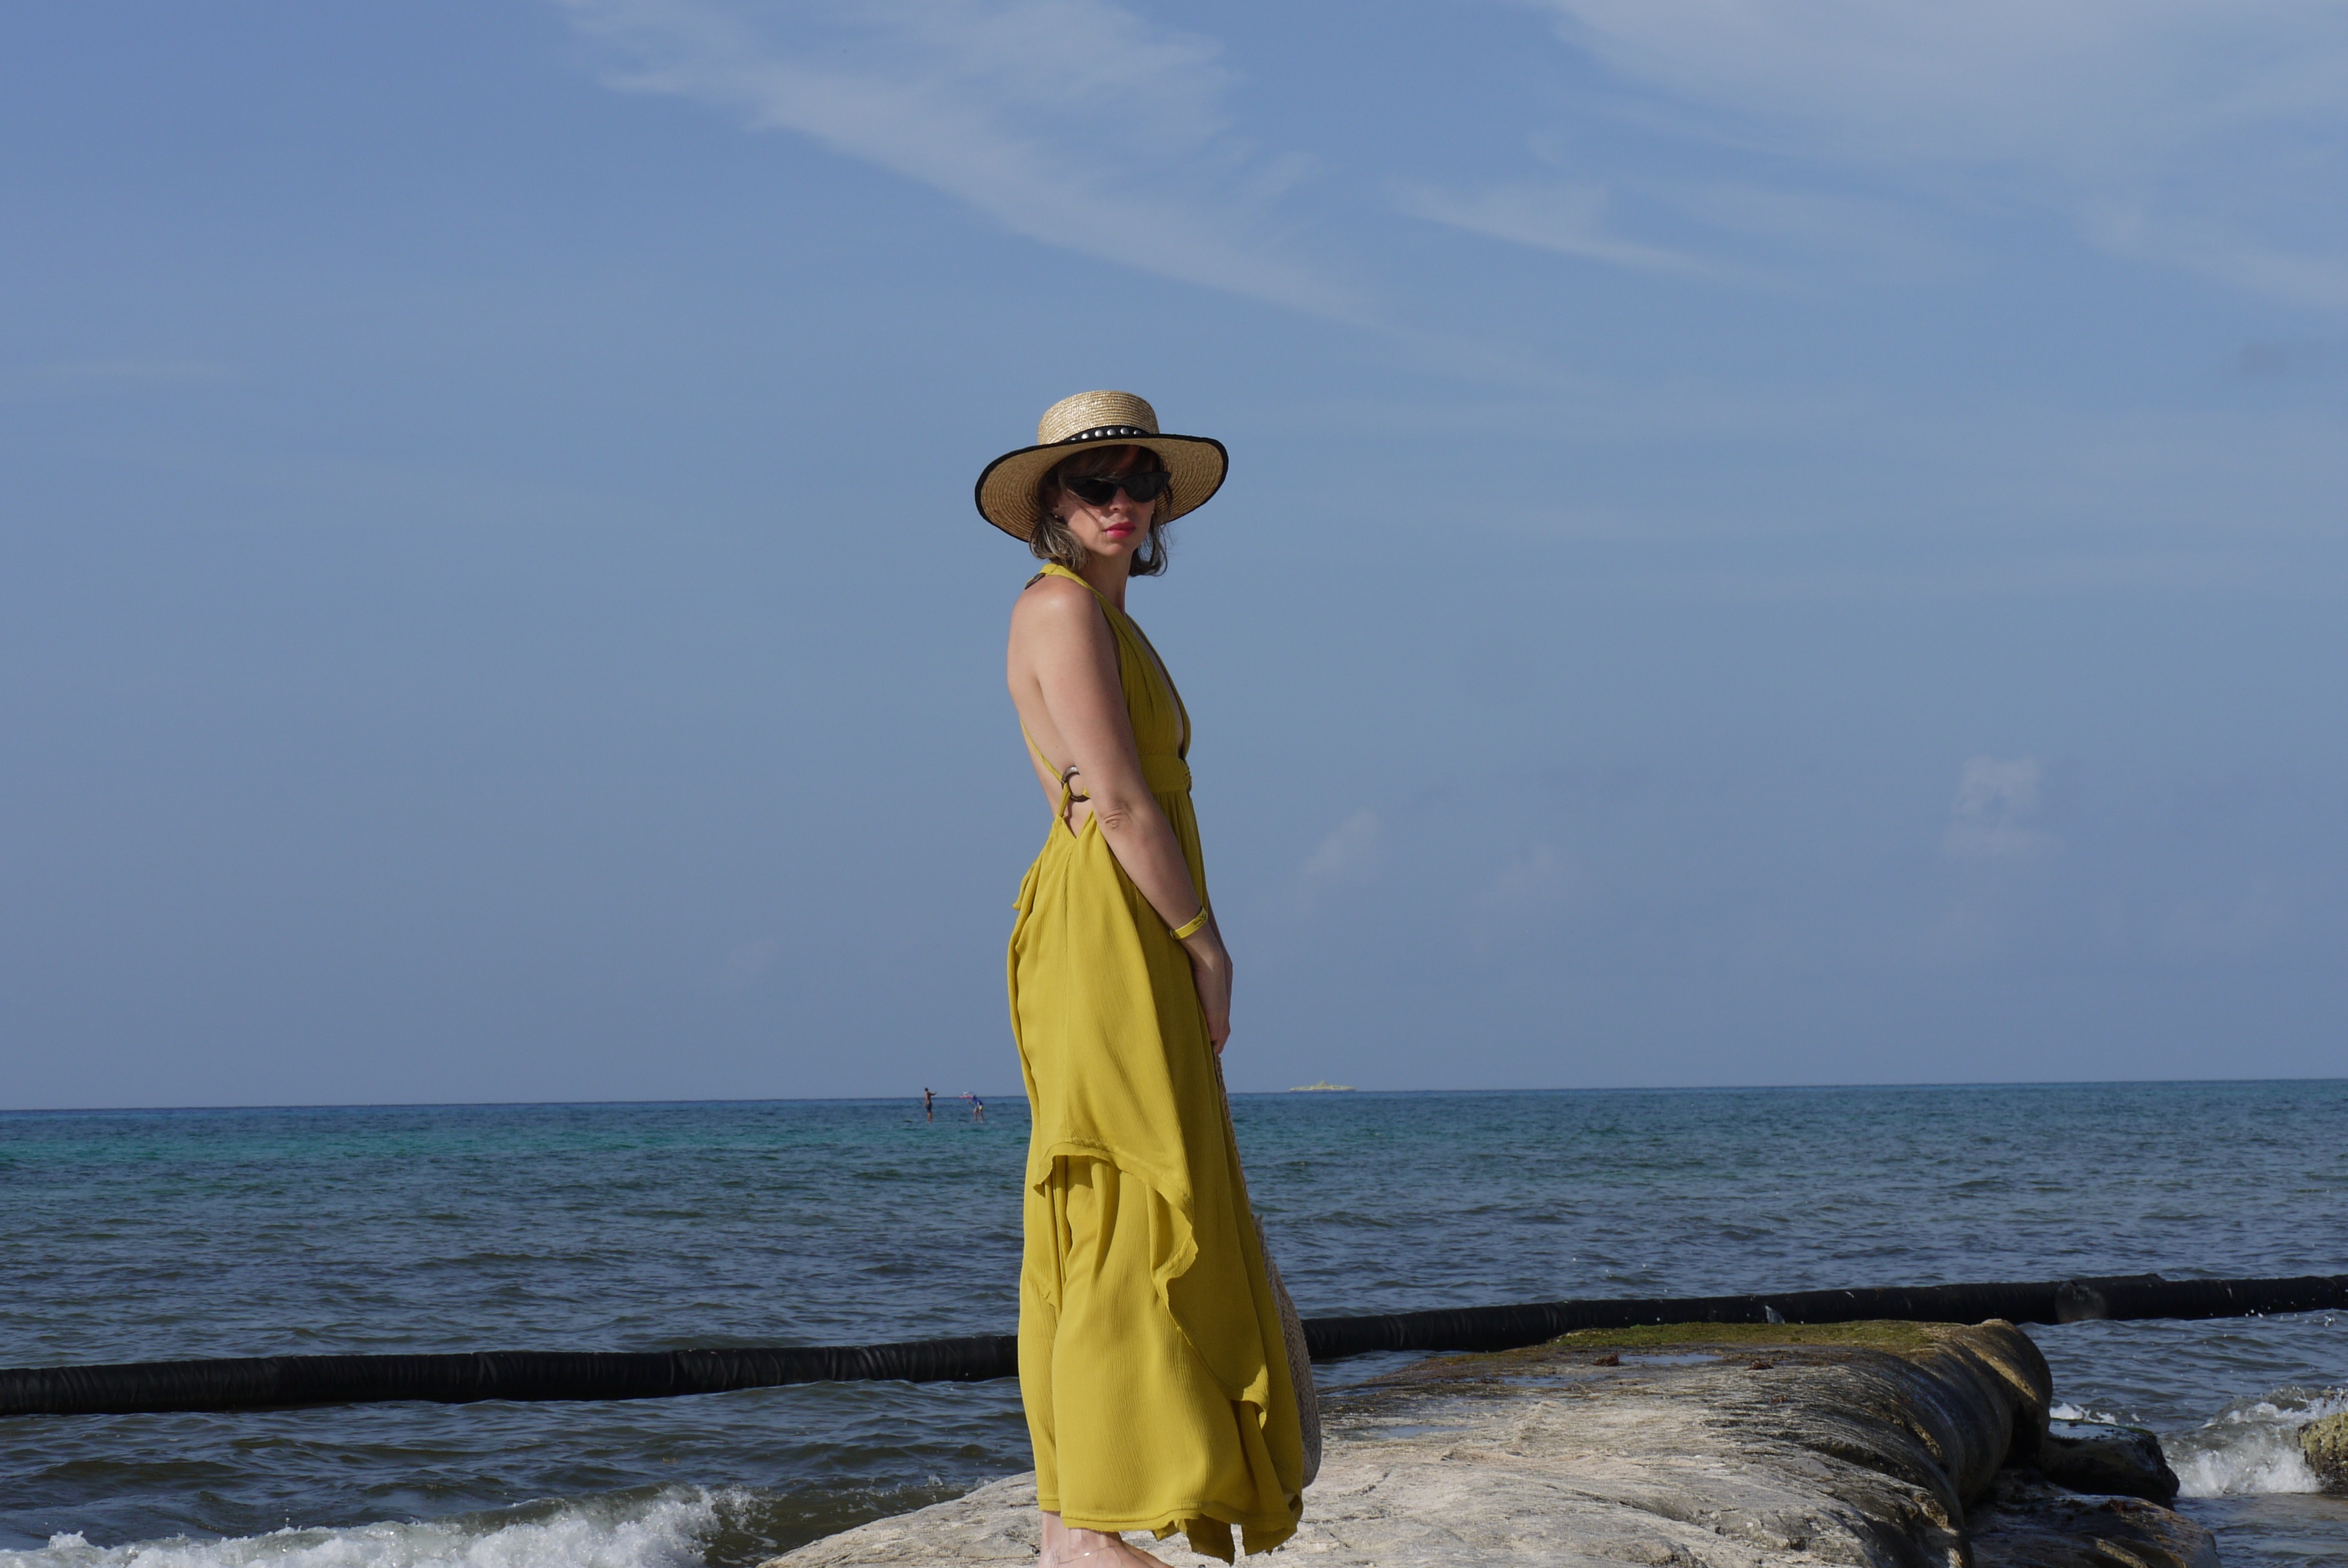 Alba Marina Otero fashion blogger from Mylovelypeople blog shares with you another part of her trip to Cancun with this lovely yellow dress